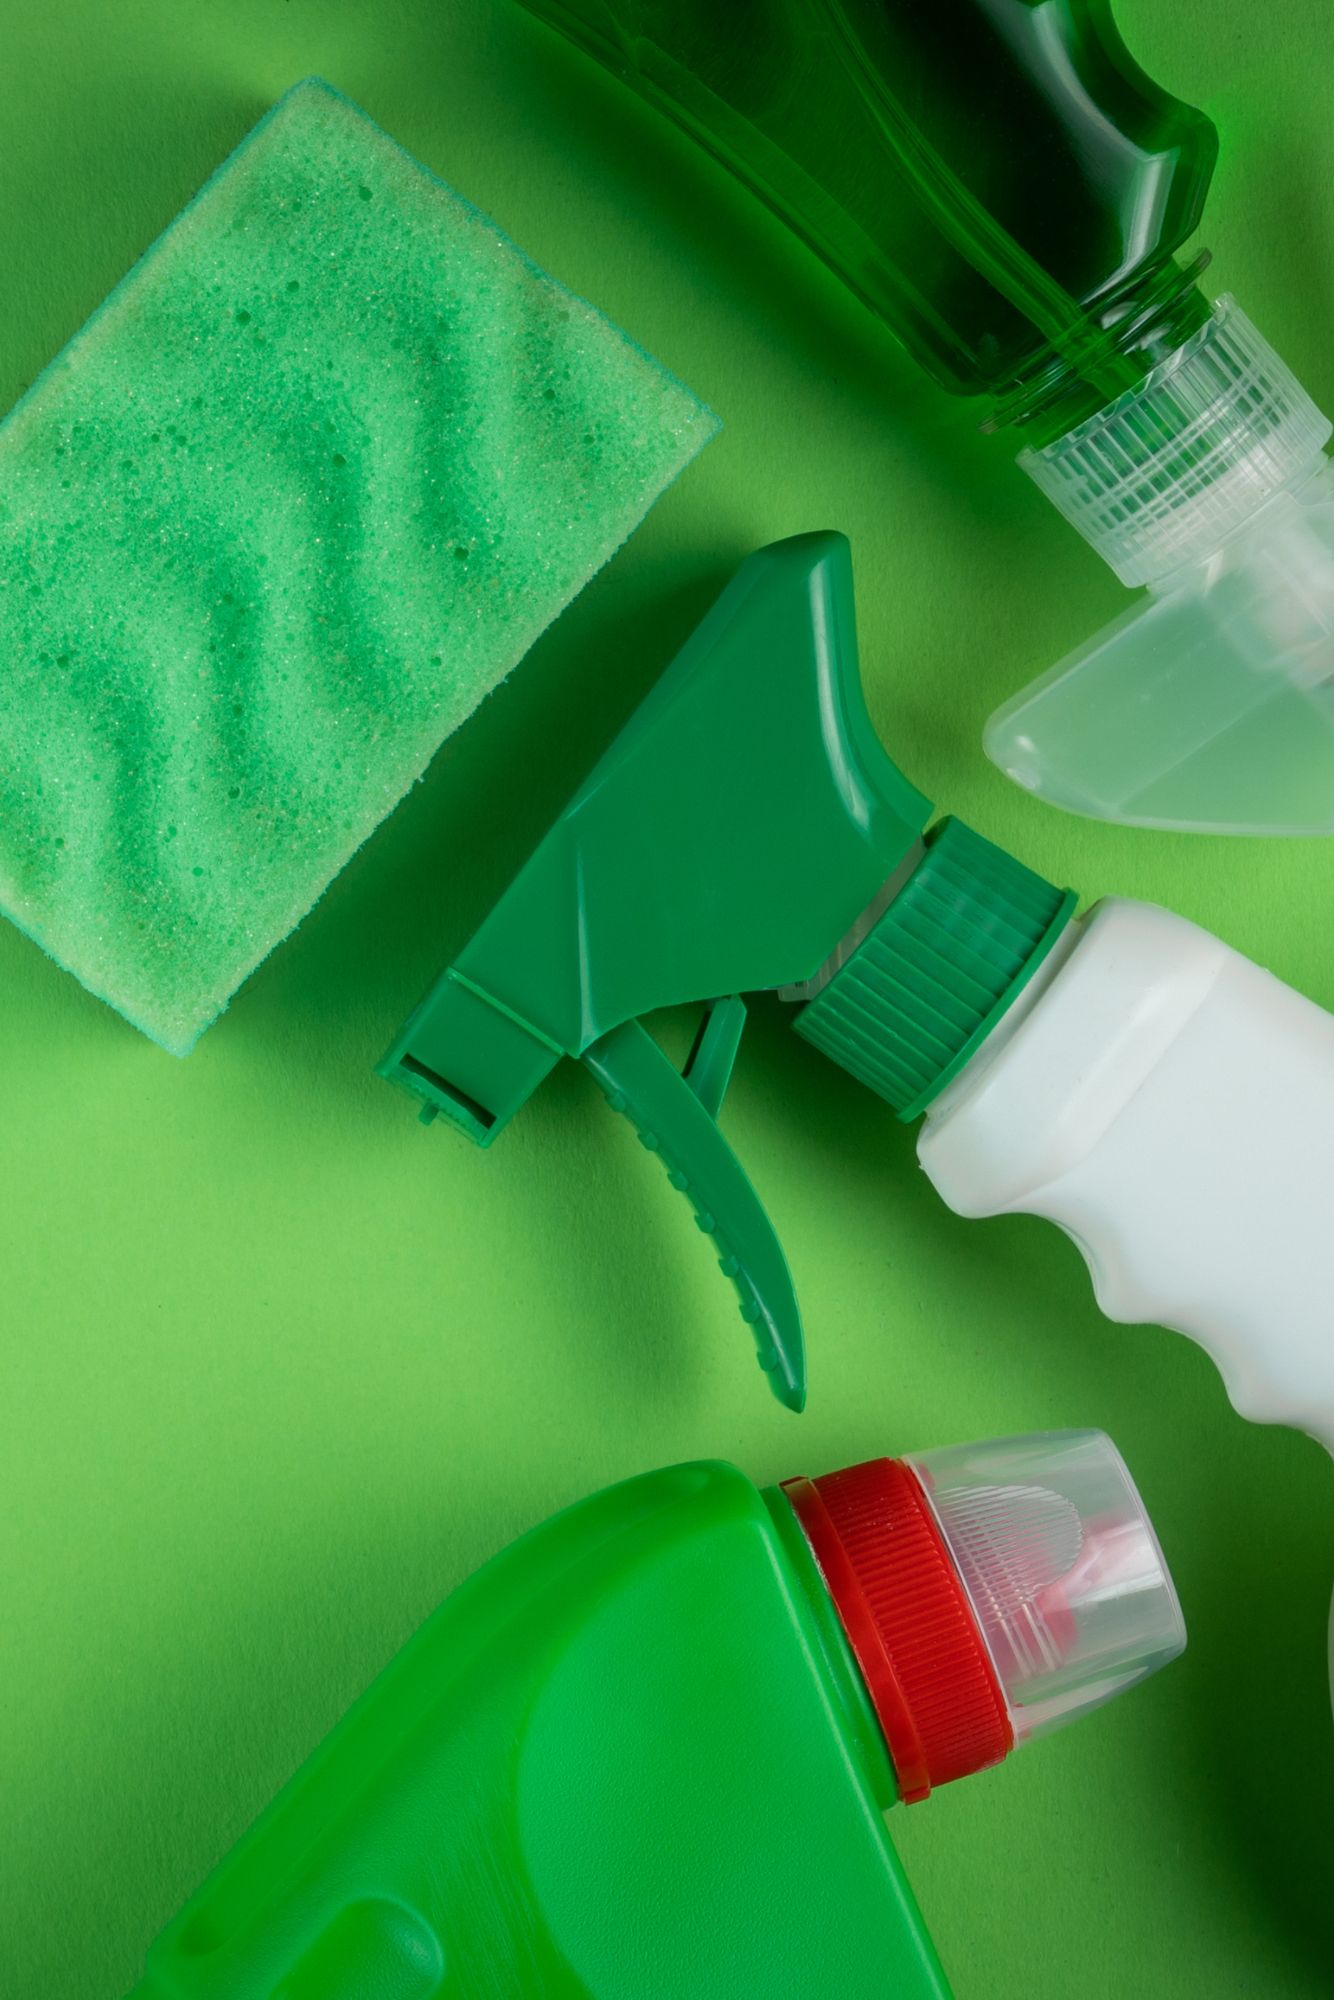 Green cleaning service in Brisbane